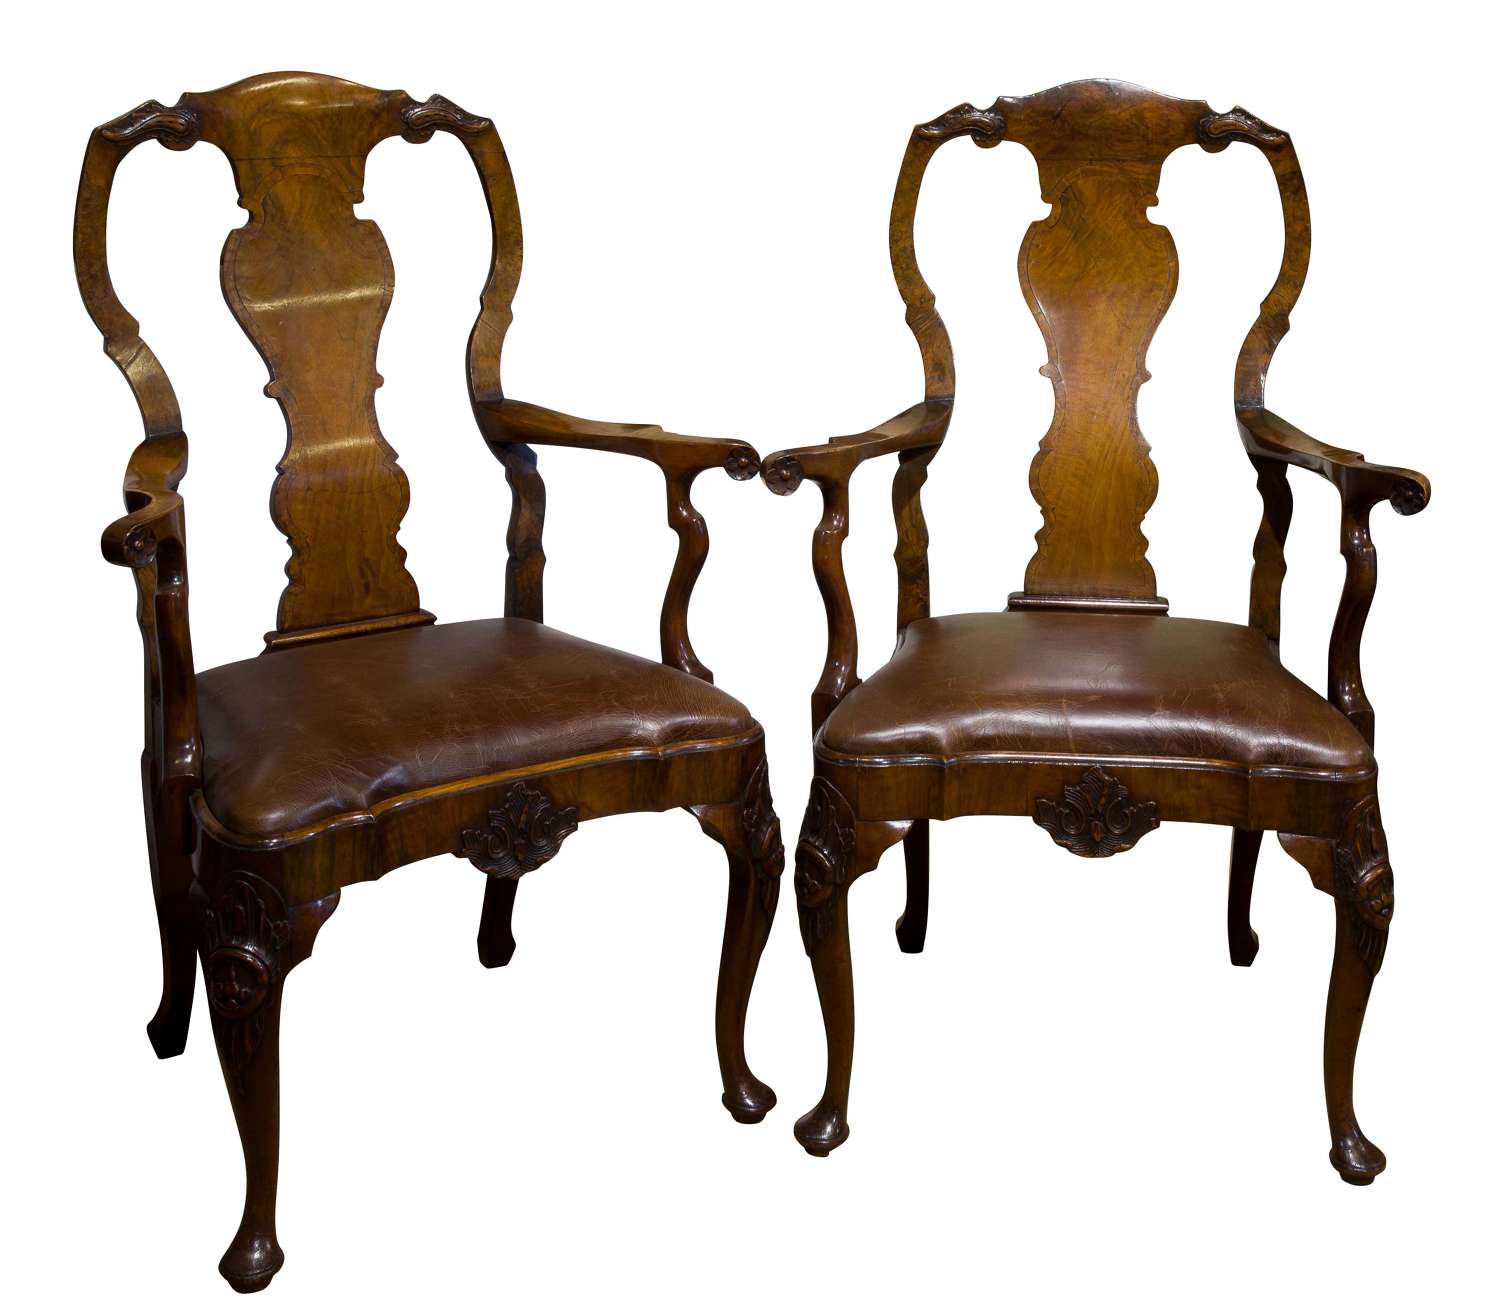 A Pair of Walnut George II style armchairs c1880